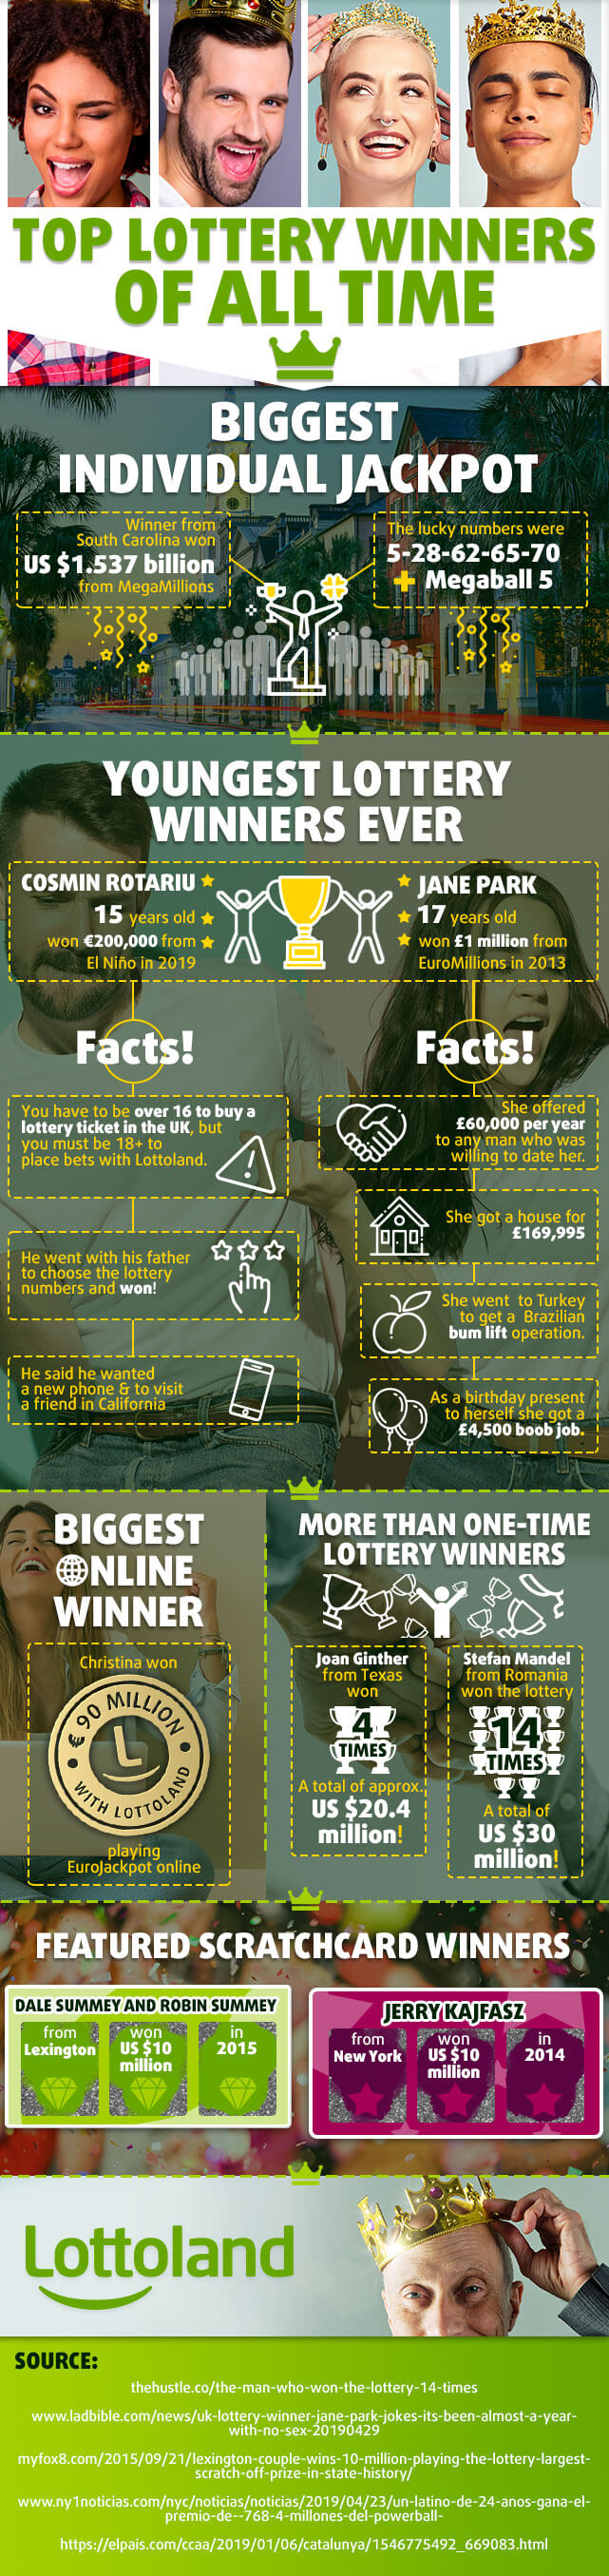 Stories of the biggest lottery winners of all time in infographic